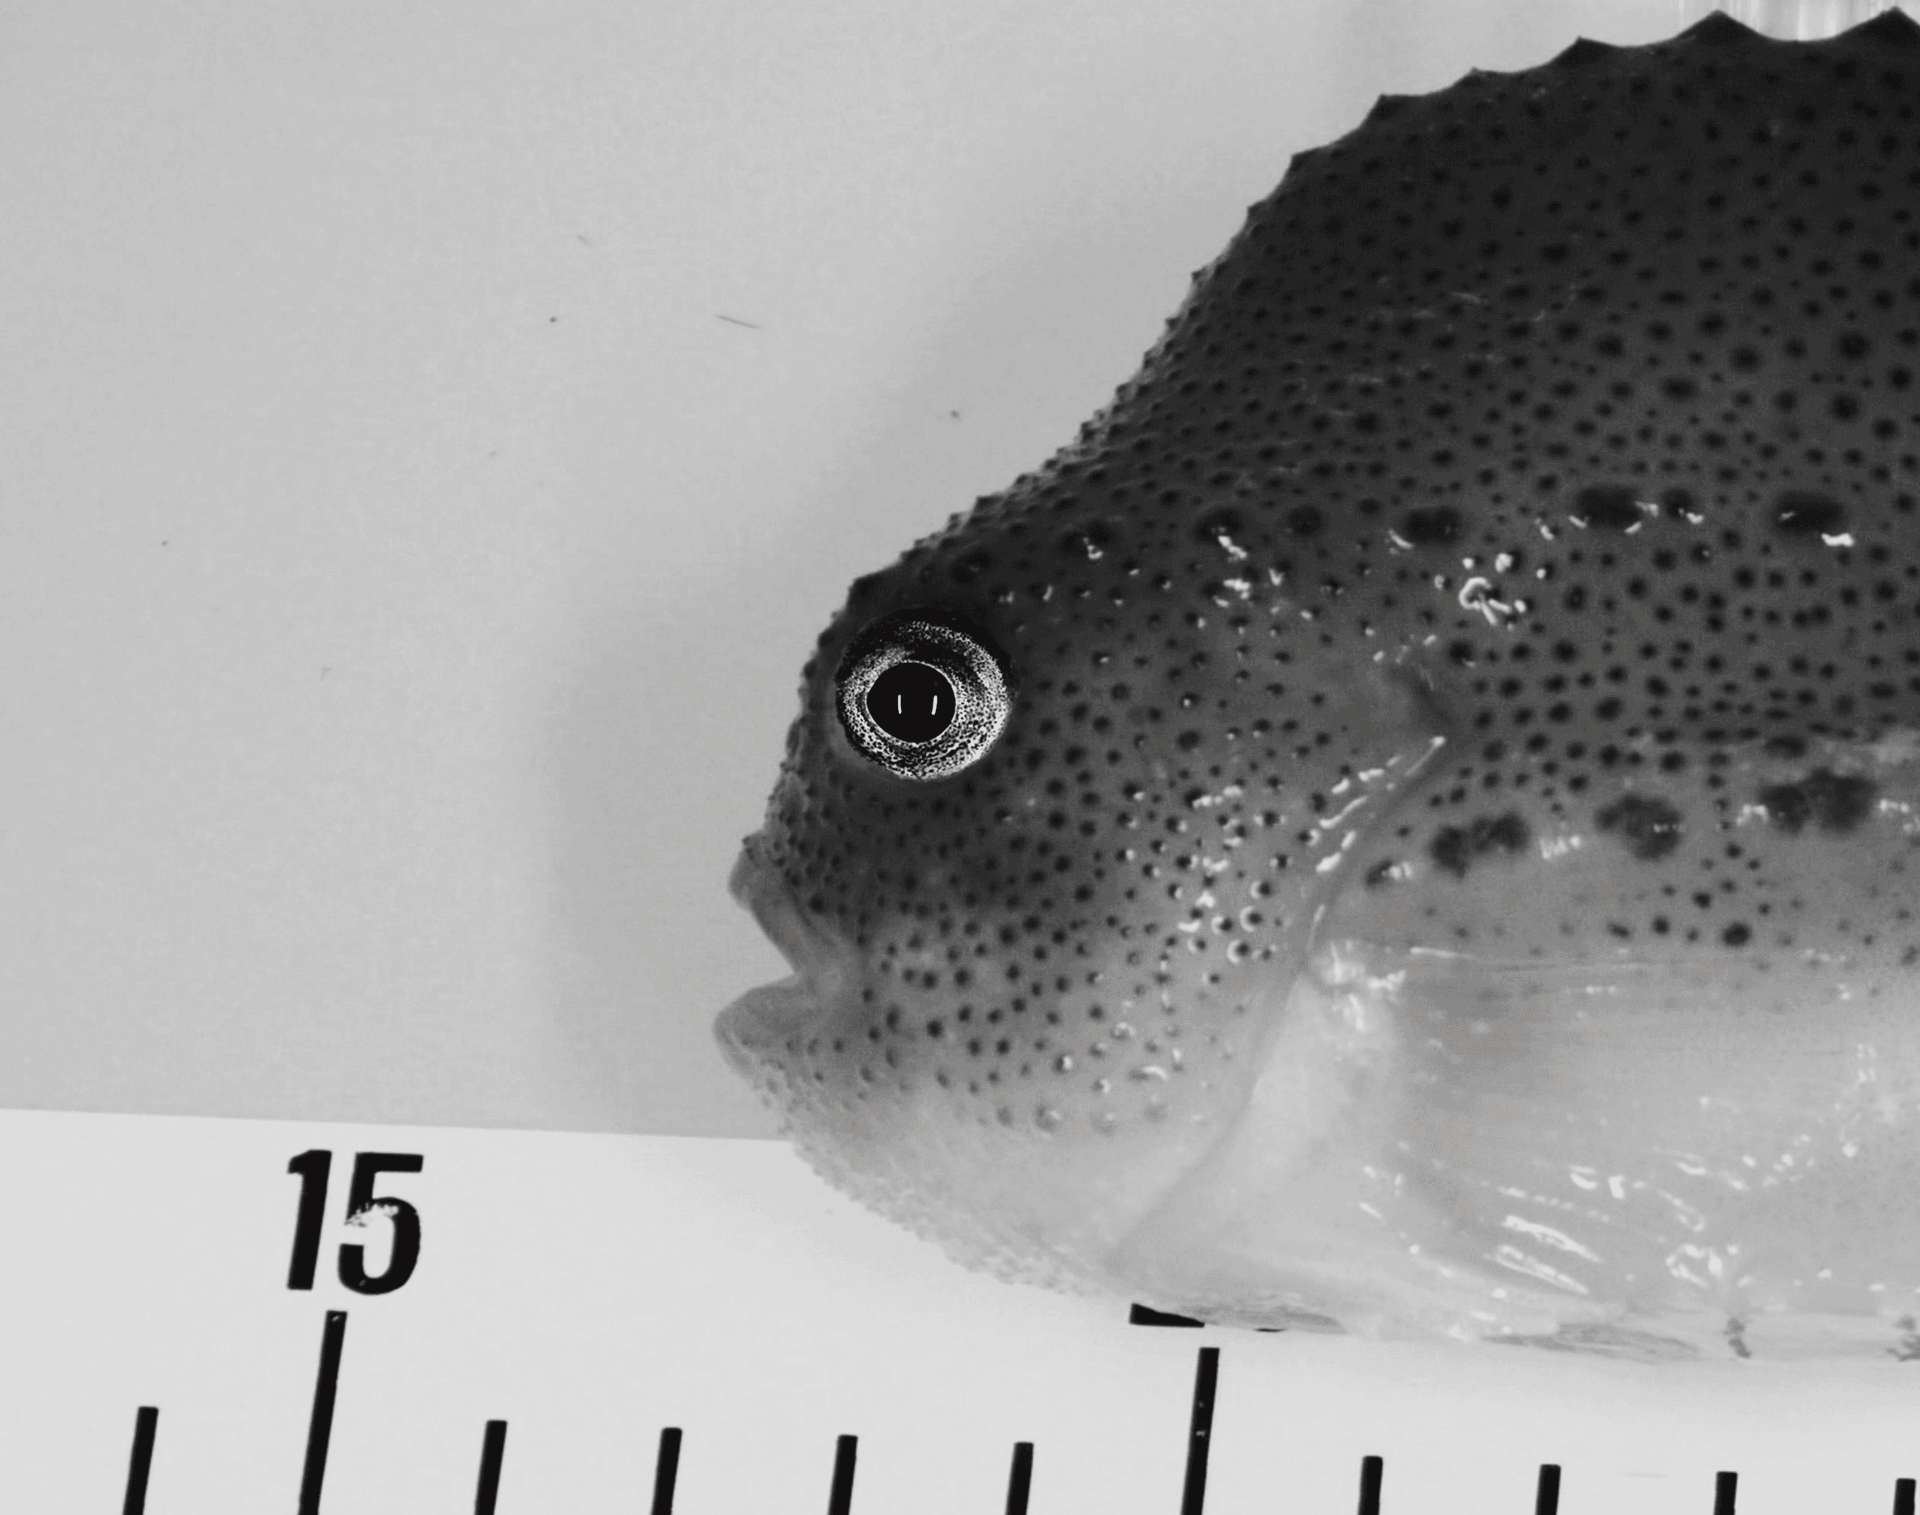 Applying a personality profiling approach to lumpfish — and potentially other animals — can reveal useful information about their behaviour.